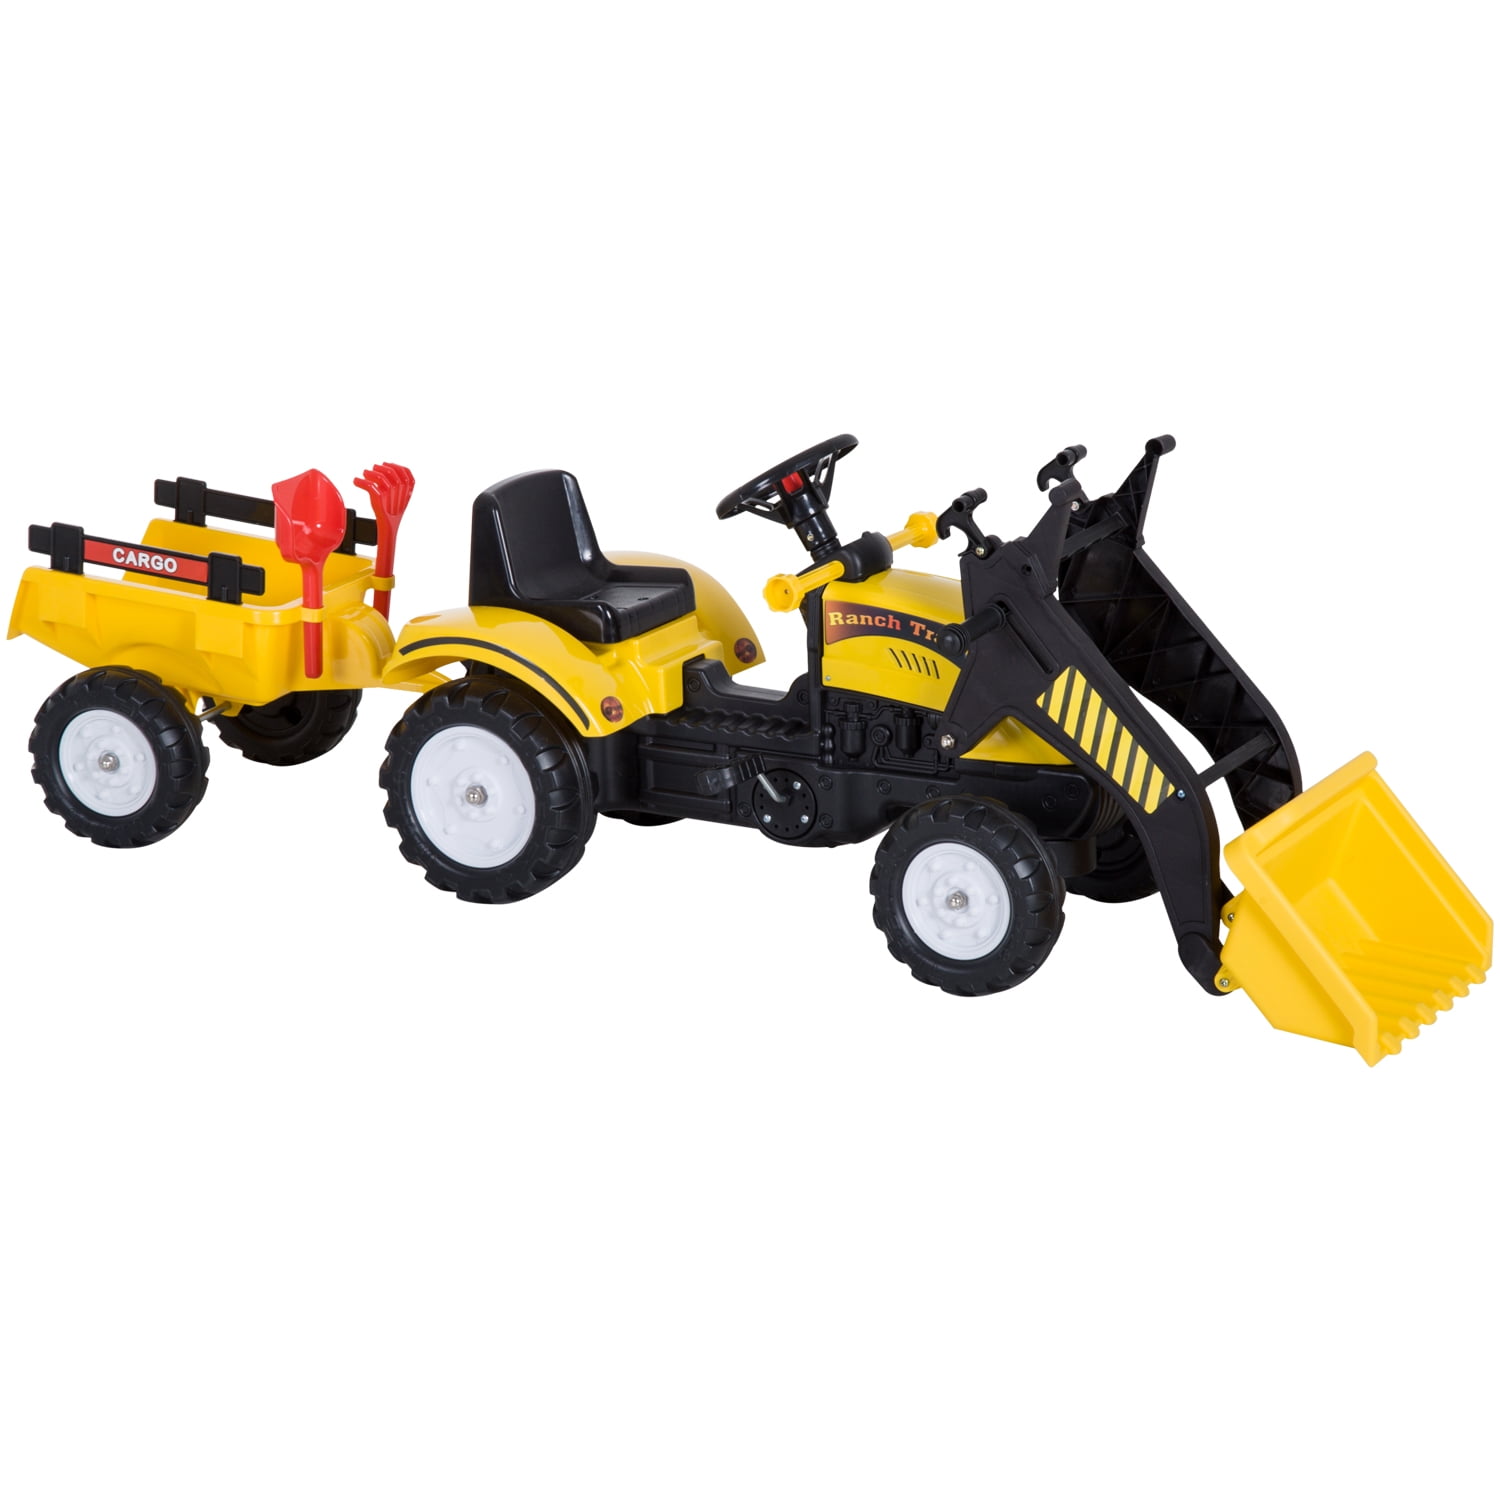 Details about   Kids Ride On Excavator Digger Tractor Truck Toy Scooter Pulling Cart w/ Helmet 